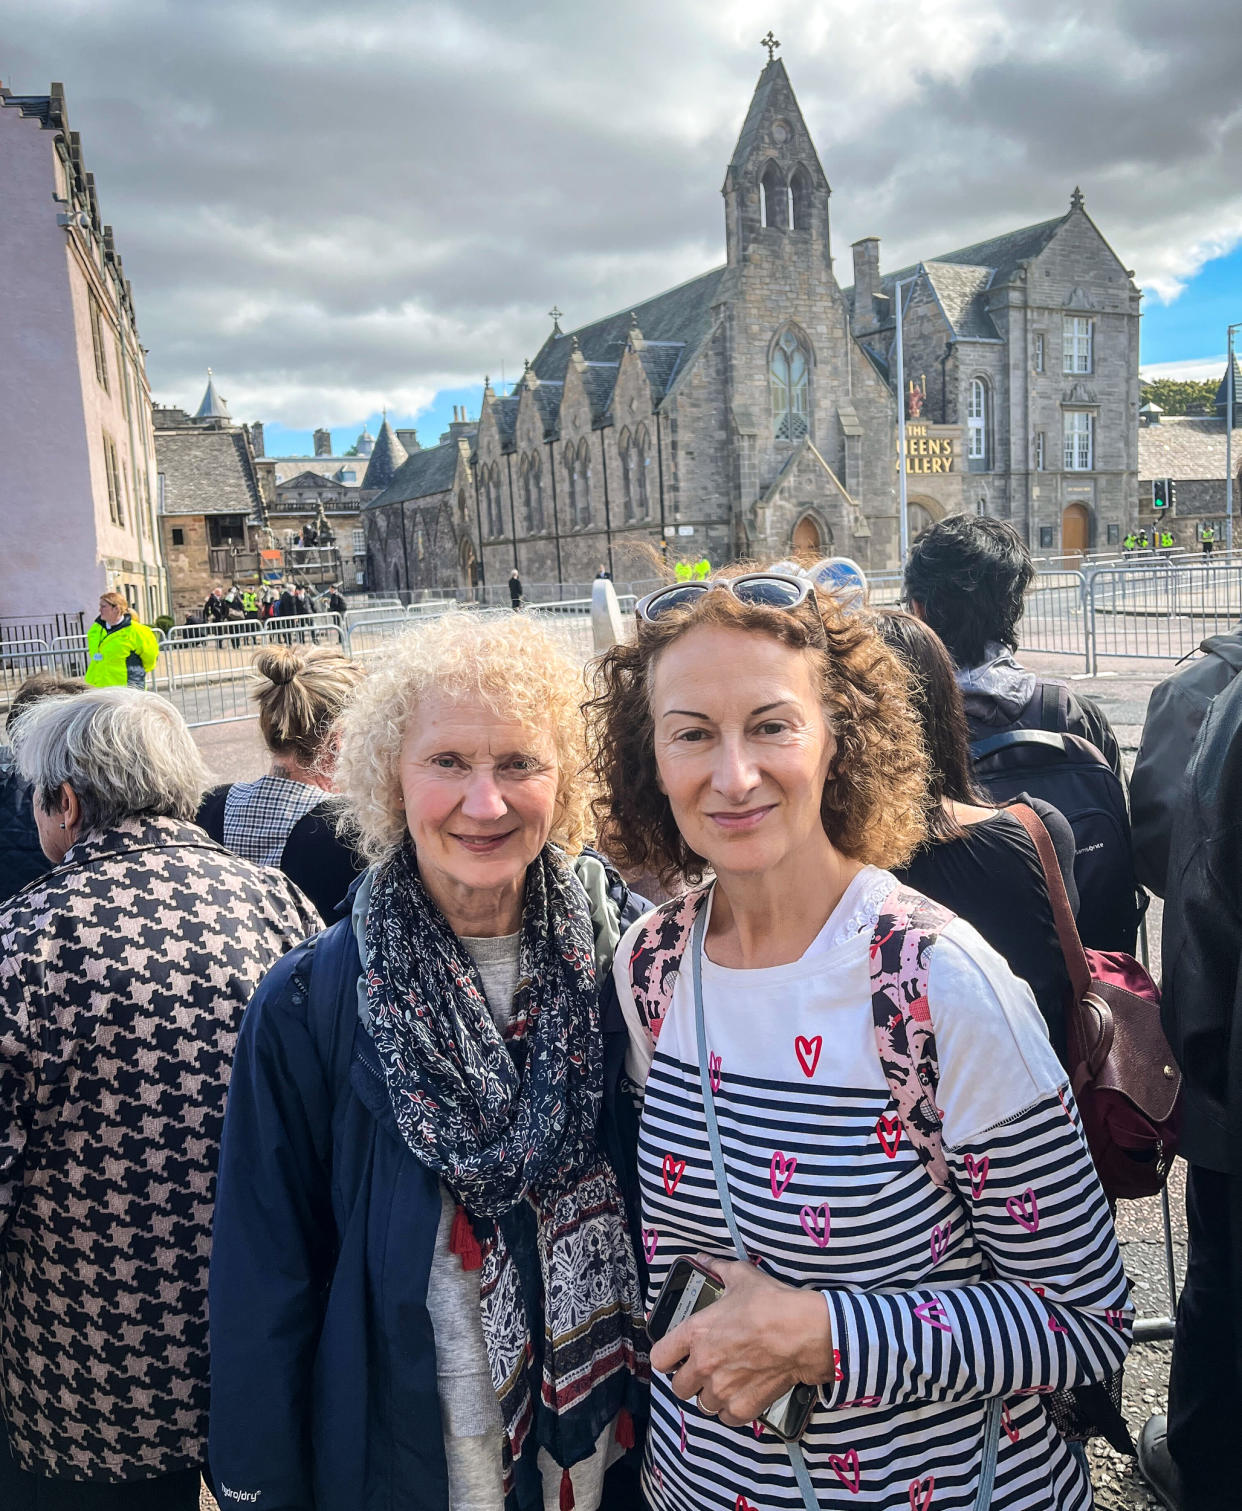 Catherine Vost, 69, and Anne Tullo, 62, traveled from nearby Glashow and arrived more than two hours before the king’s scheduled historic appearance, in Edinburgh, Scotland on Monday. (Alexander Smith / NBC News)